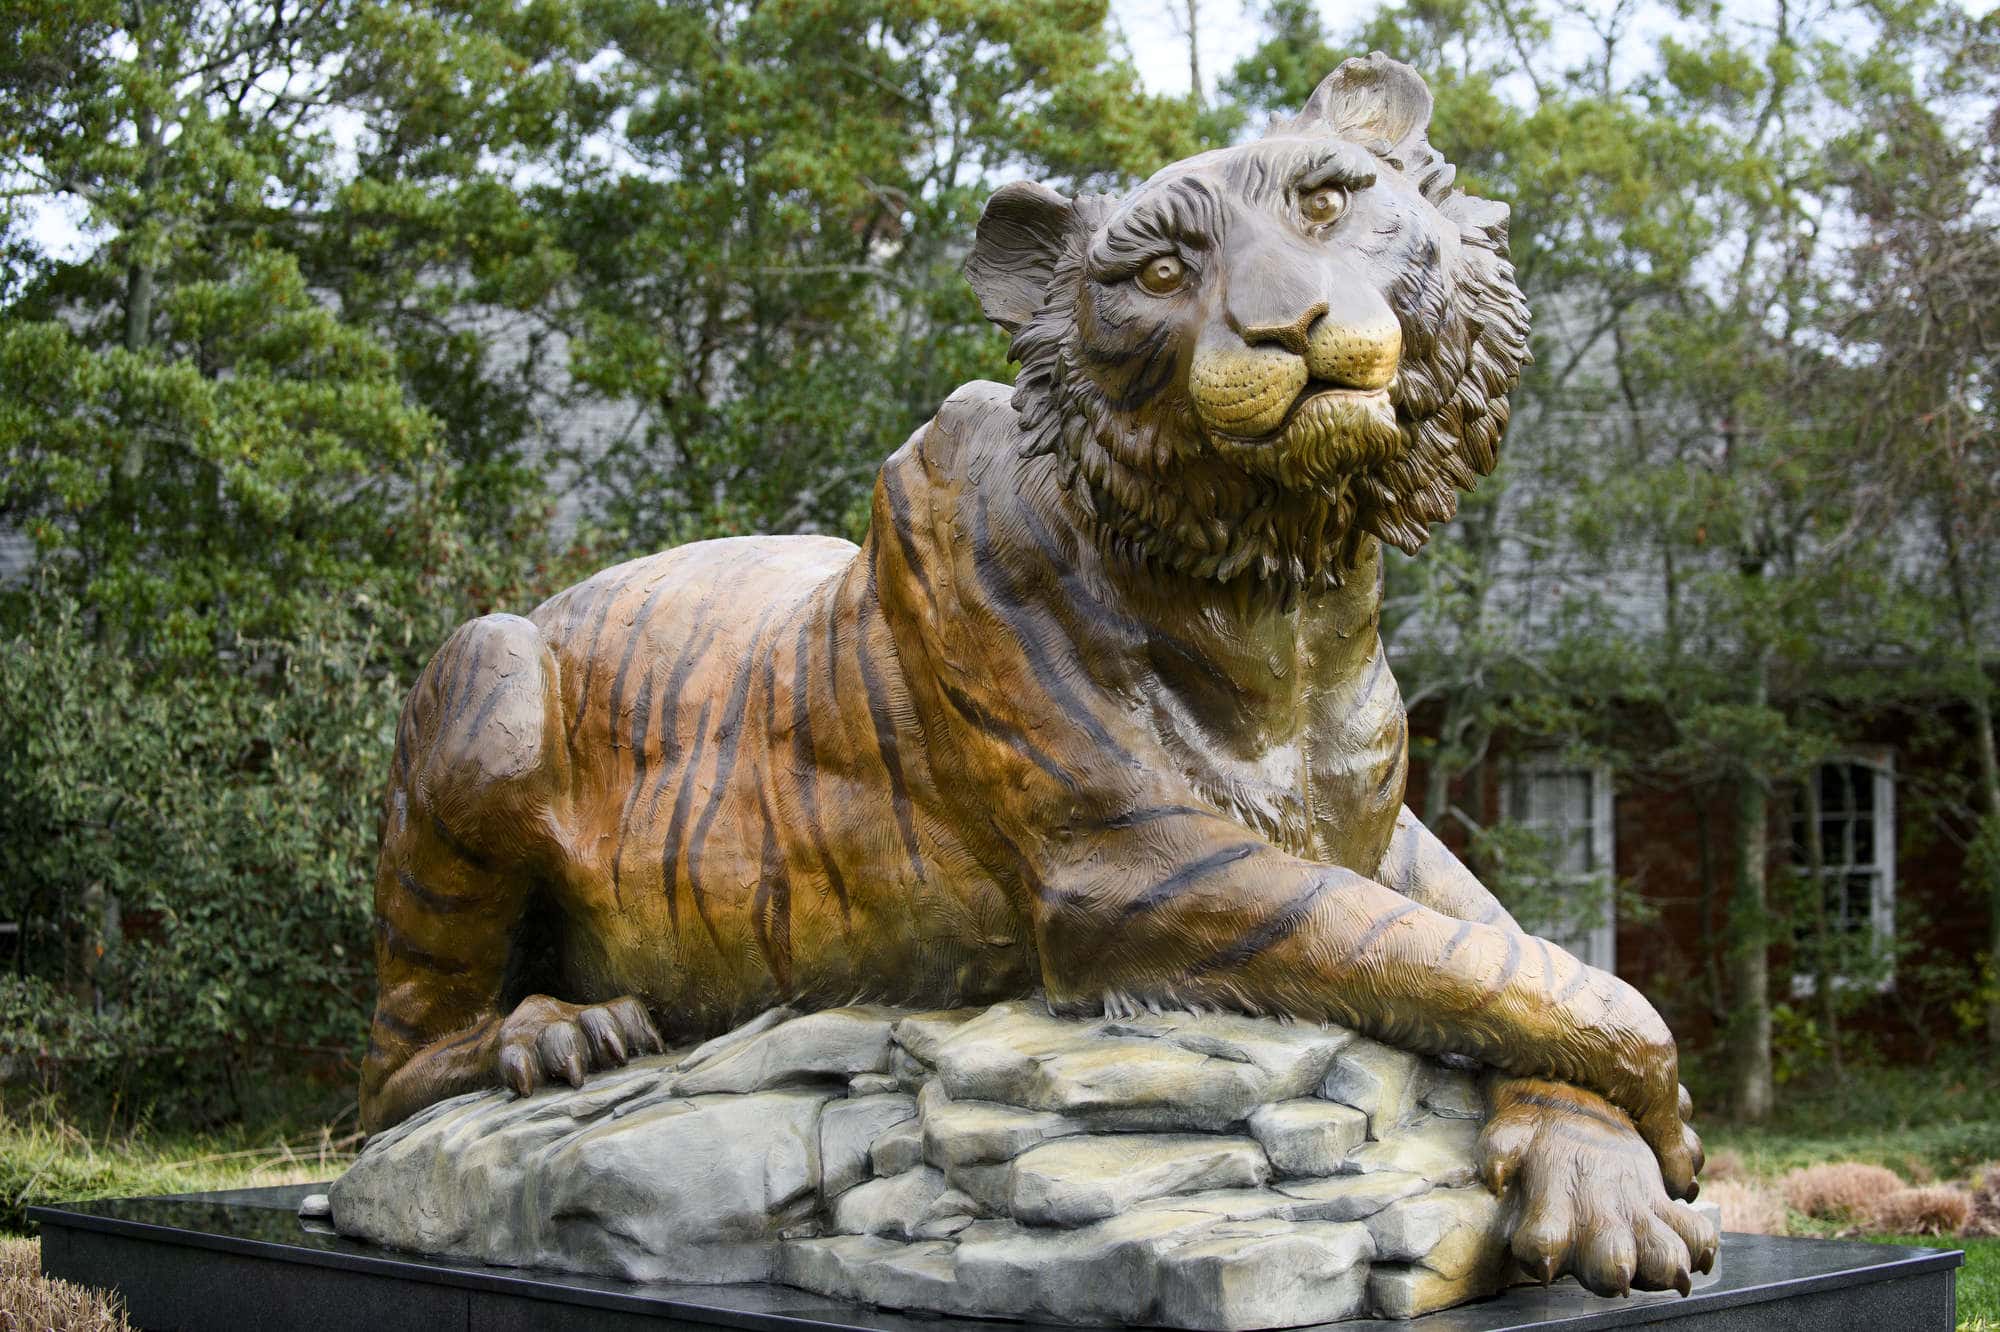 Lucile, the bronze golden tiger statue